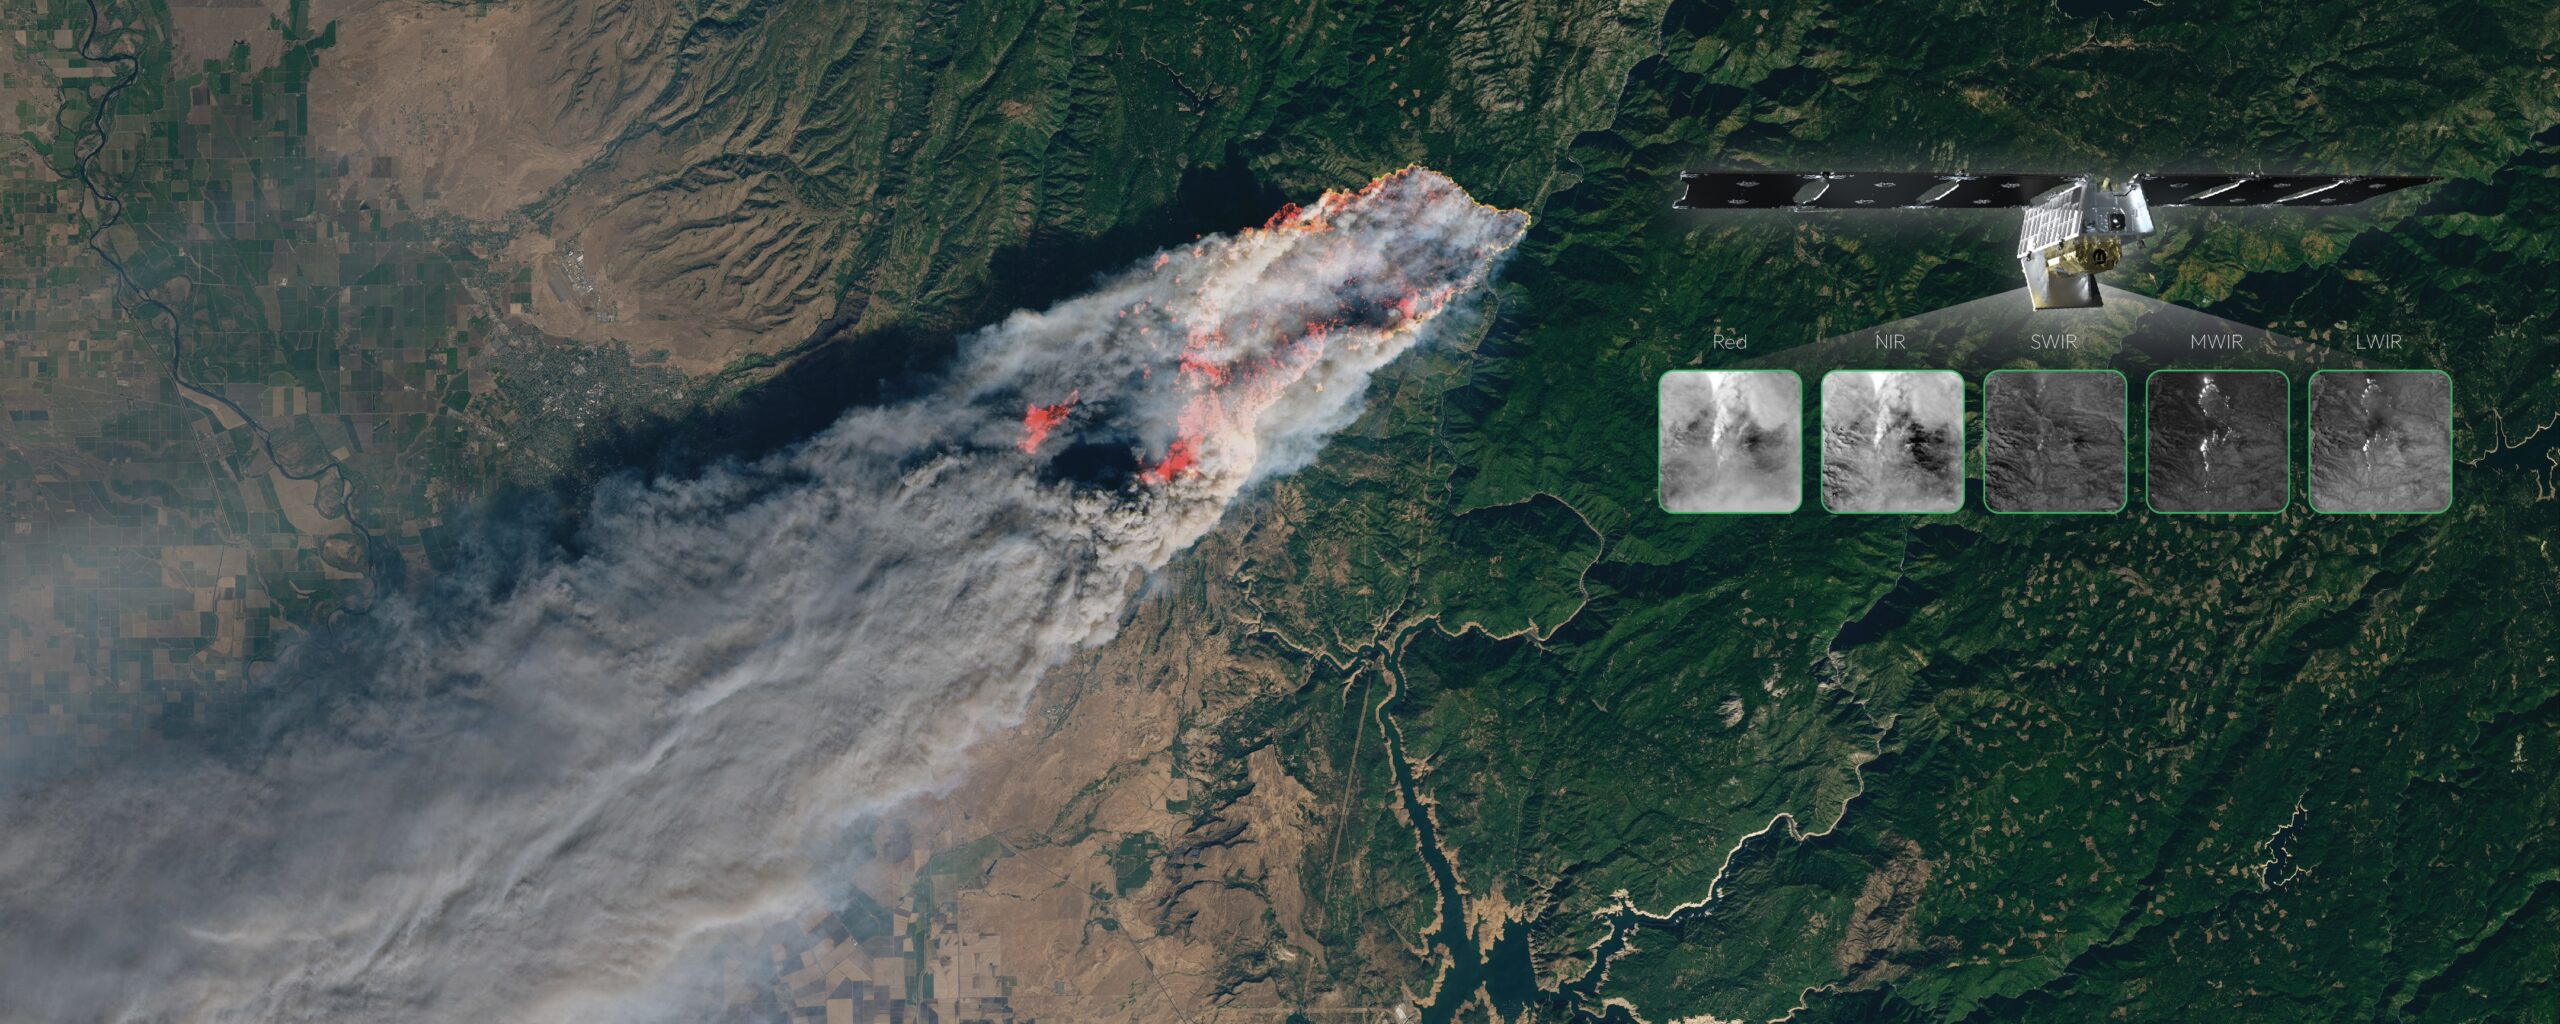 Muon Space and Earth Fire Alliance to build constellation for wildfire detection and response